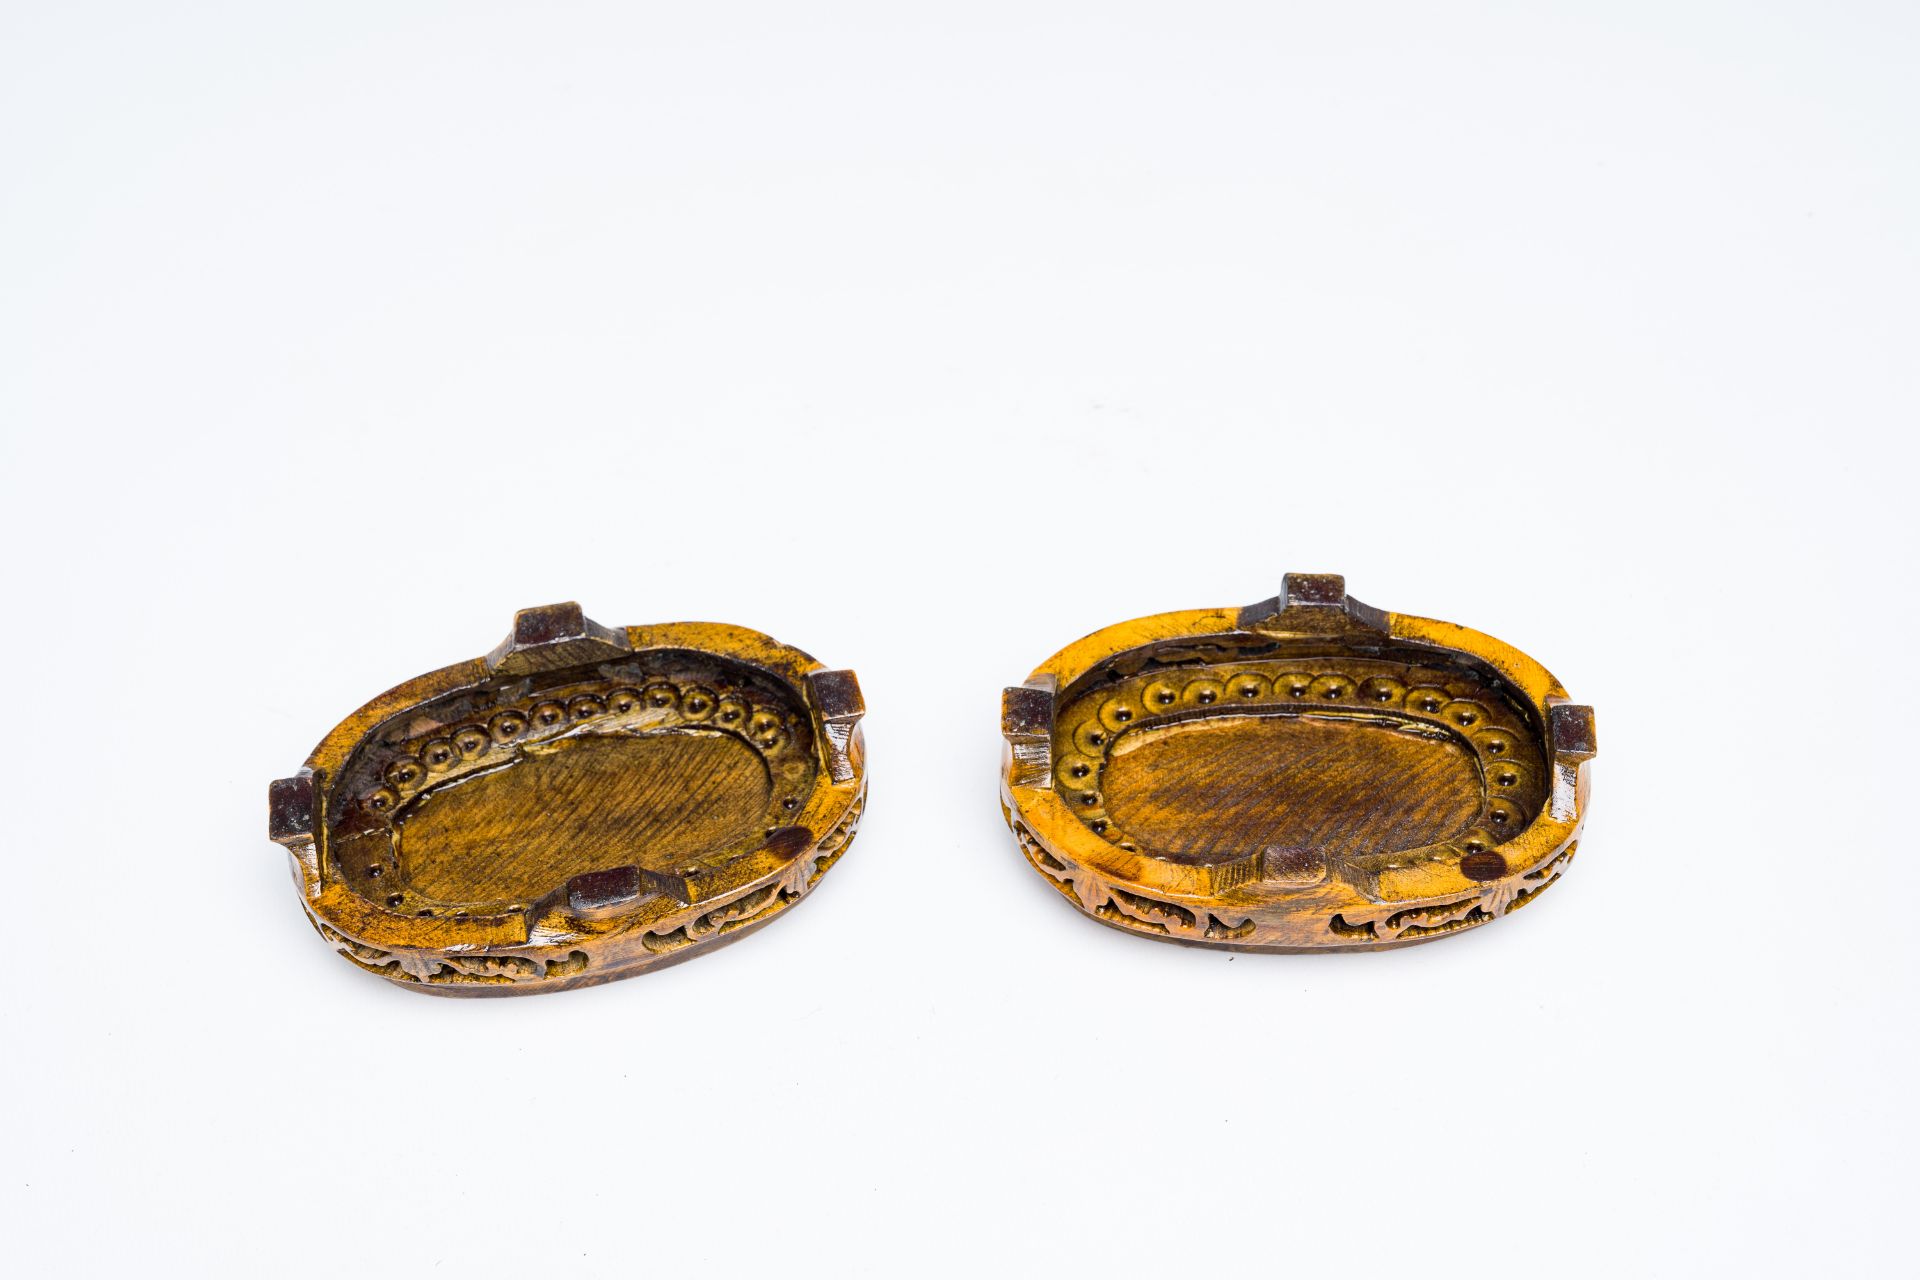 A pair of Chinese cloisonne double gourd vases on wooden stands, 20th C. - Image 9 of 9